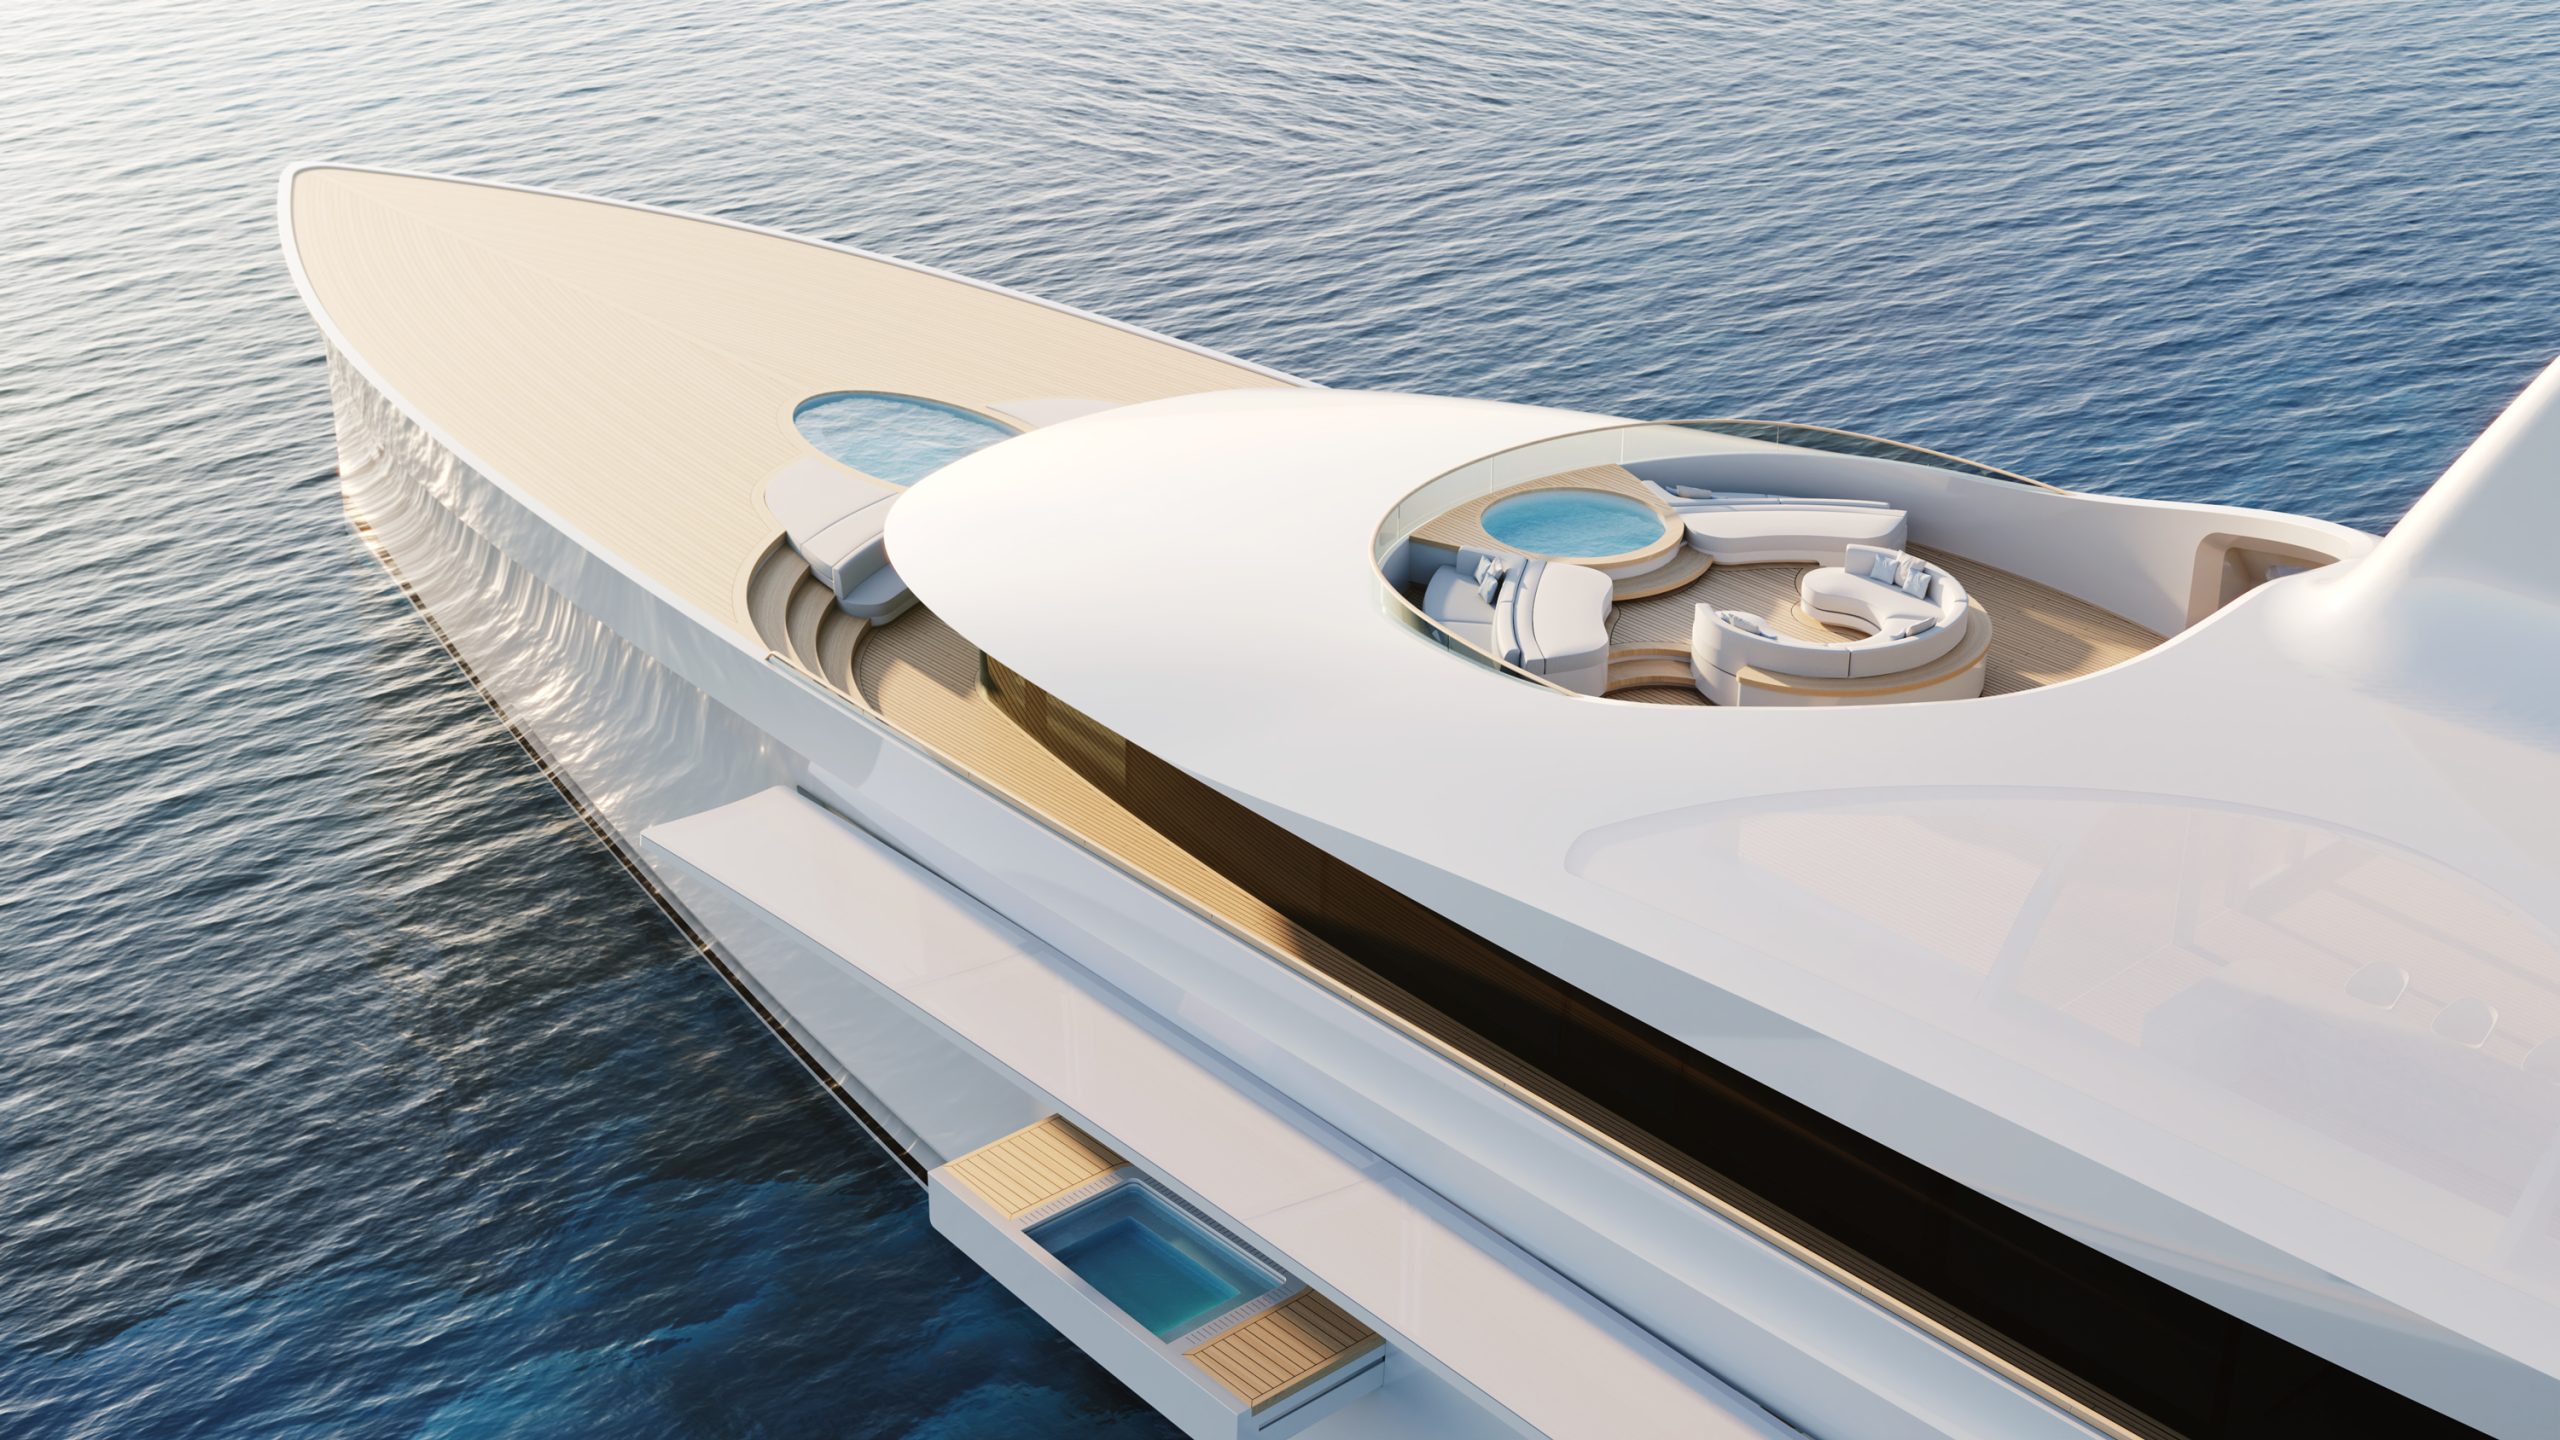 Feast your eyes on new yachts from Benetti, Heesen, and more from this year's Cannes and Monaco yacht shows. 